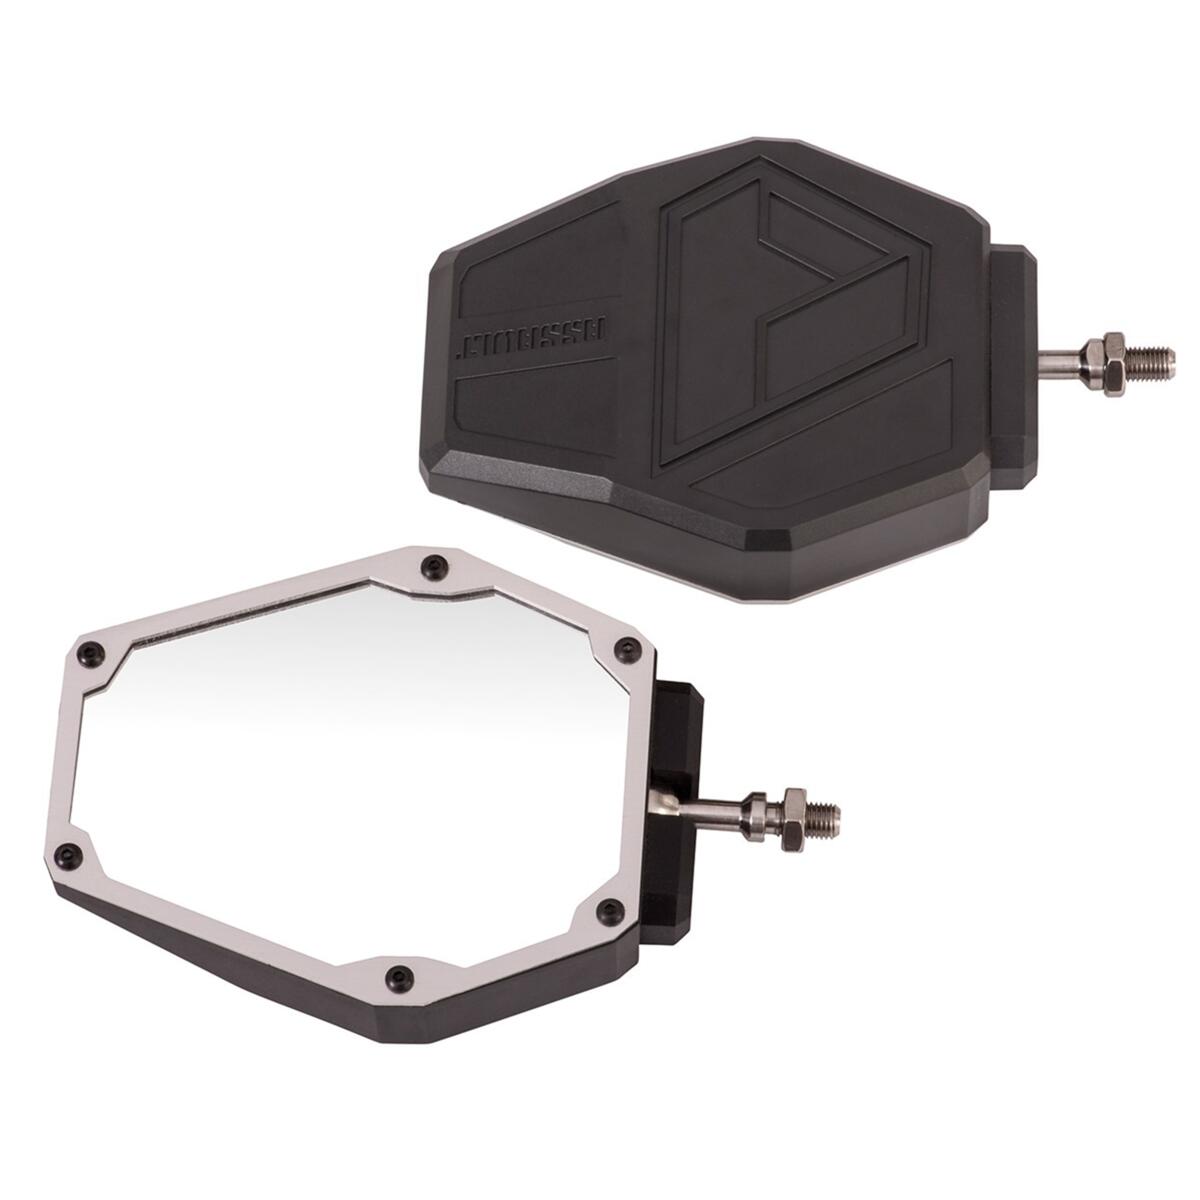 These Aviator series side-mirrors are the very latest from the Assault Collection.